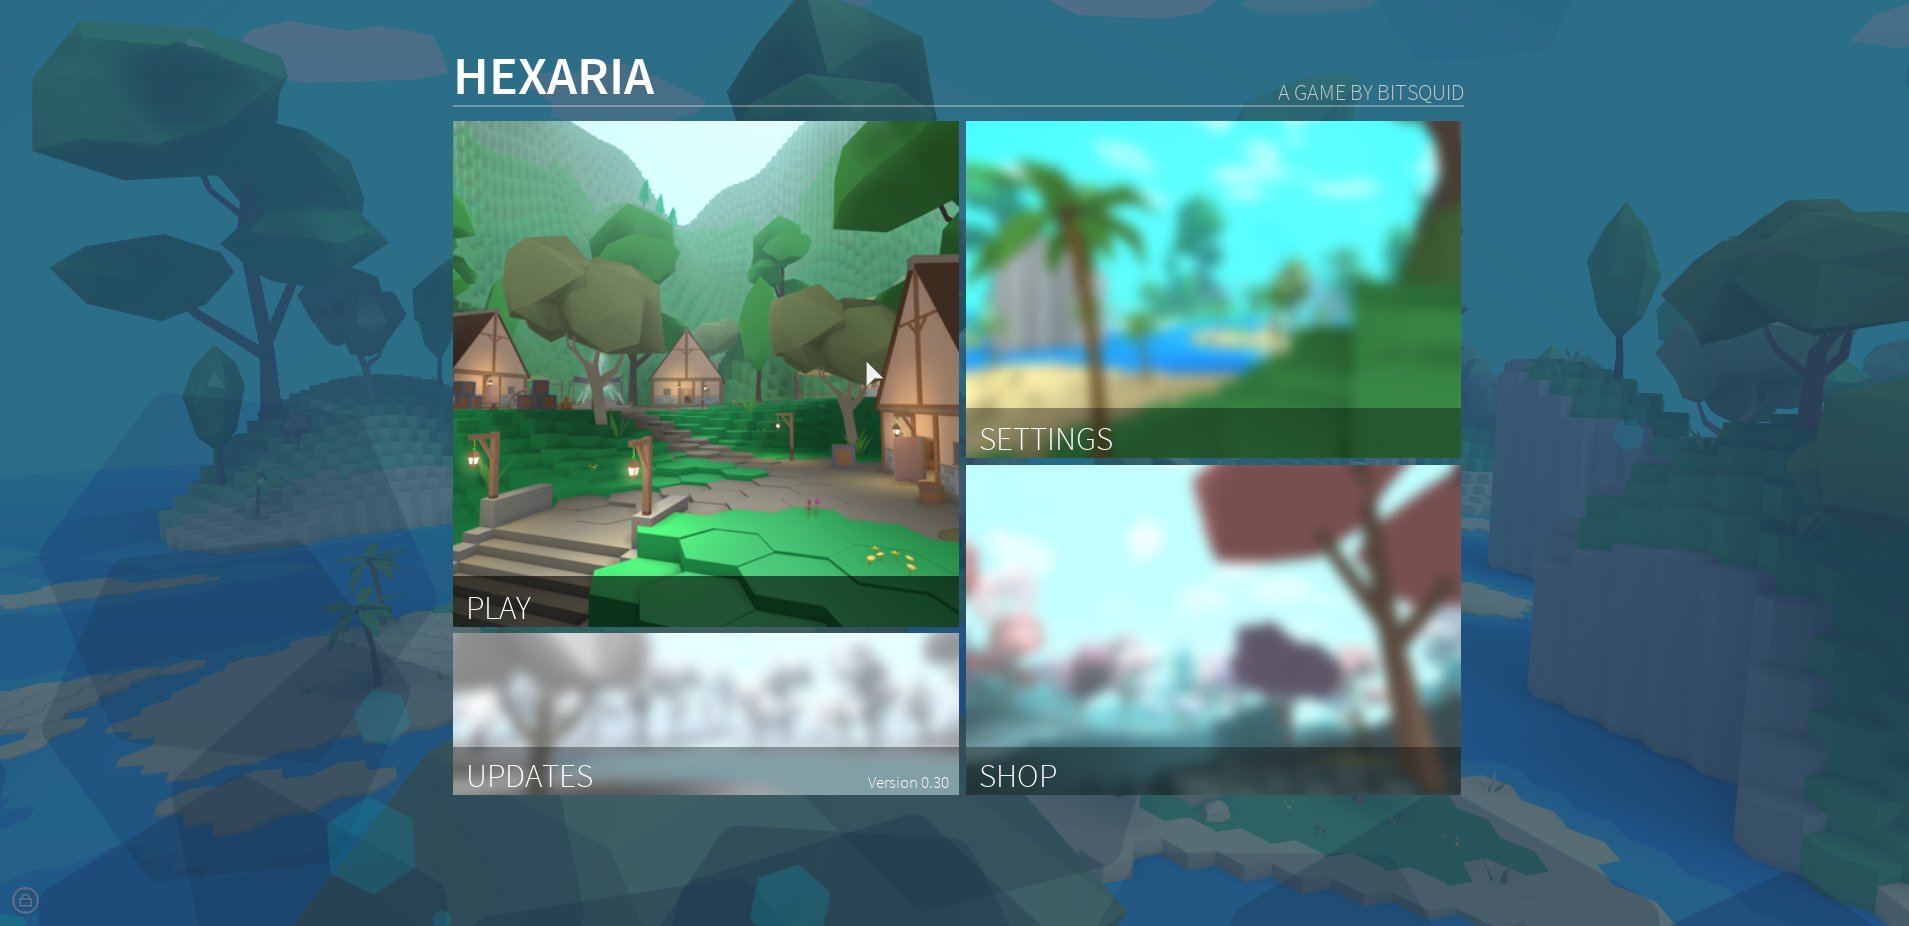 Bitsquid On Twitter Check Out The New Main Menu We Have In Hexaria Play Here Https T Co Jrale92bwa Roblox Robloxdev - roblox hexaria discord